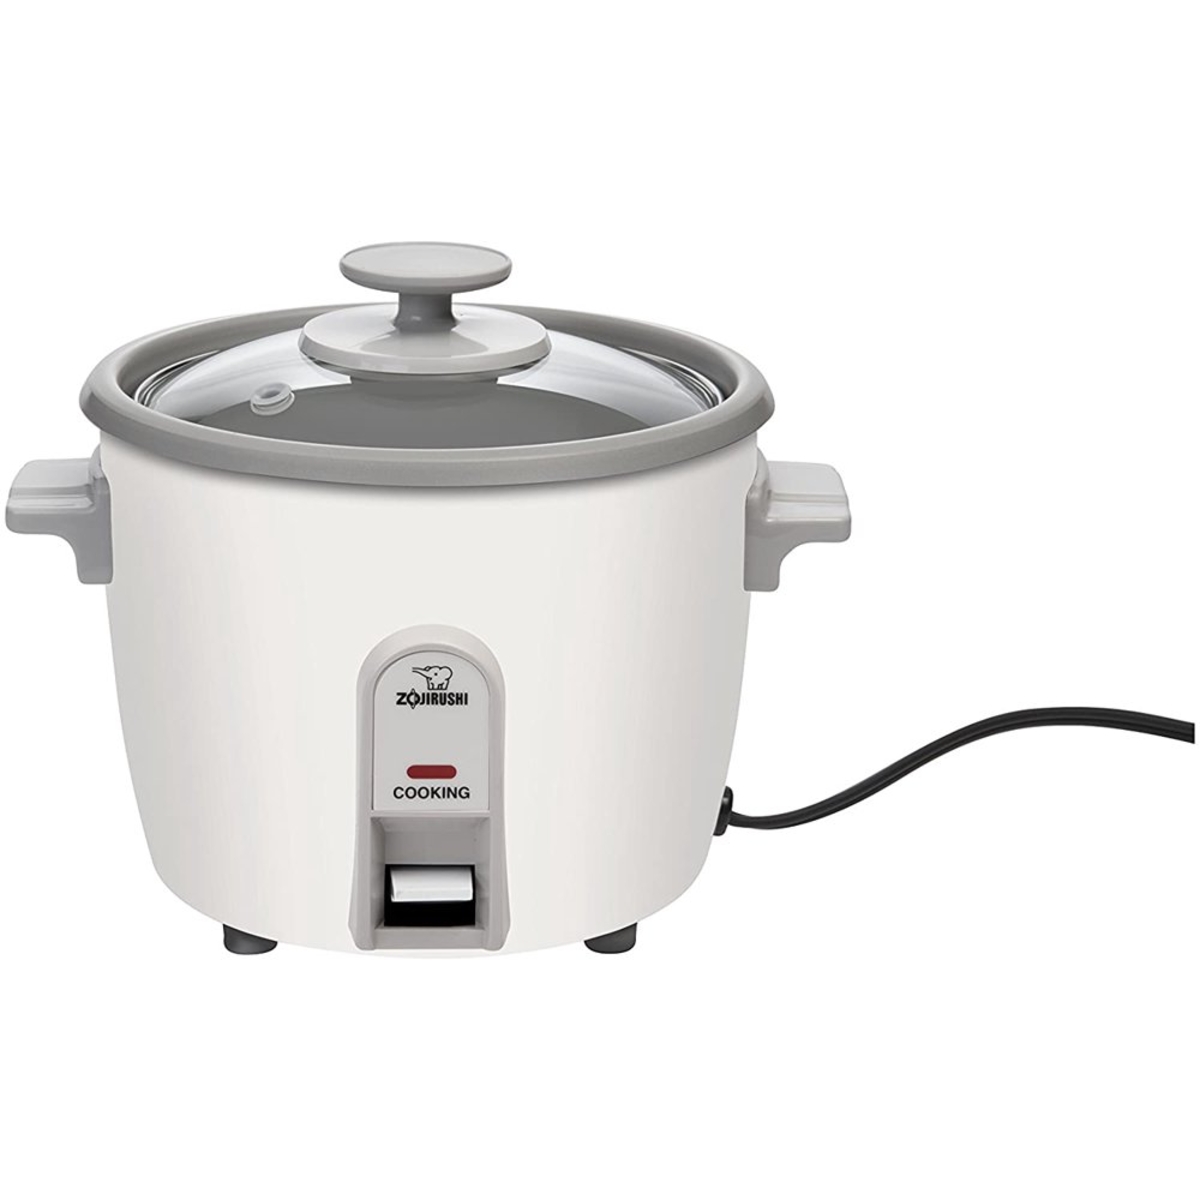 13 Unbelievable Zojirushi Nhs-06 Rice Cooker, 3 Cup Steamer For 2023